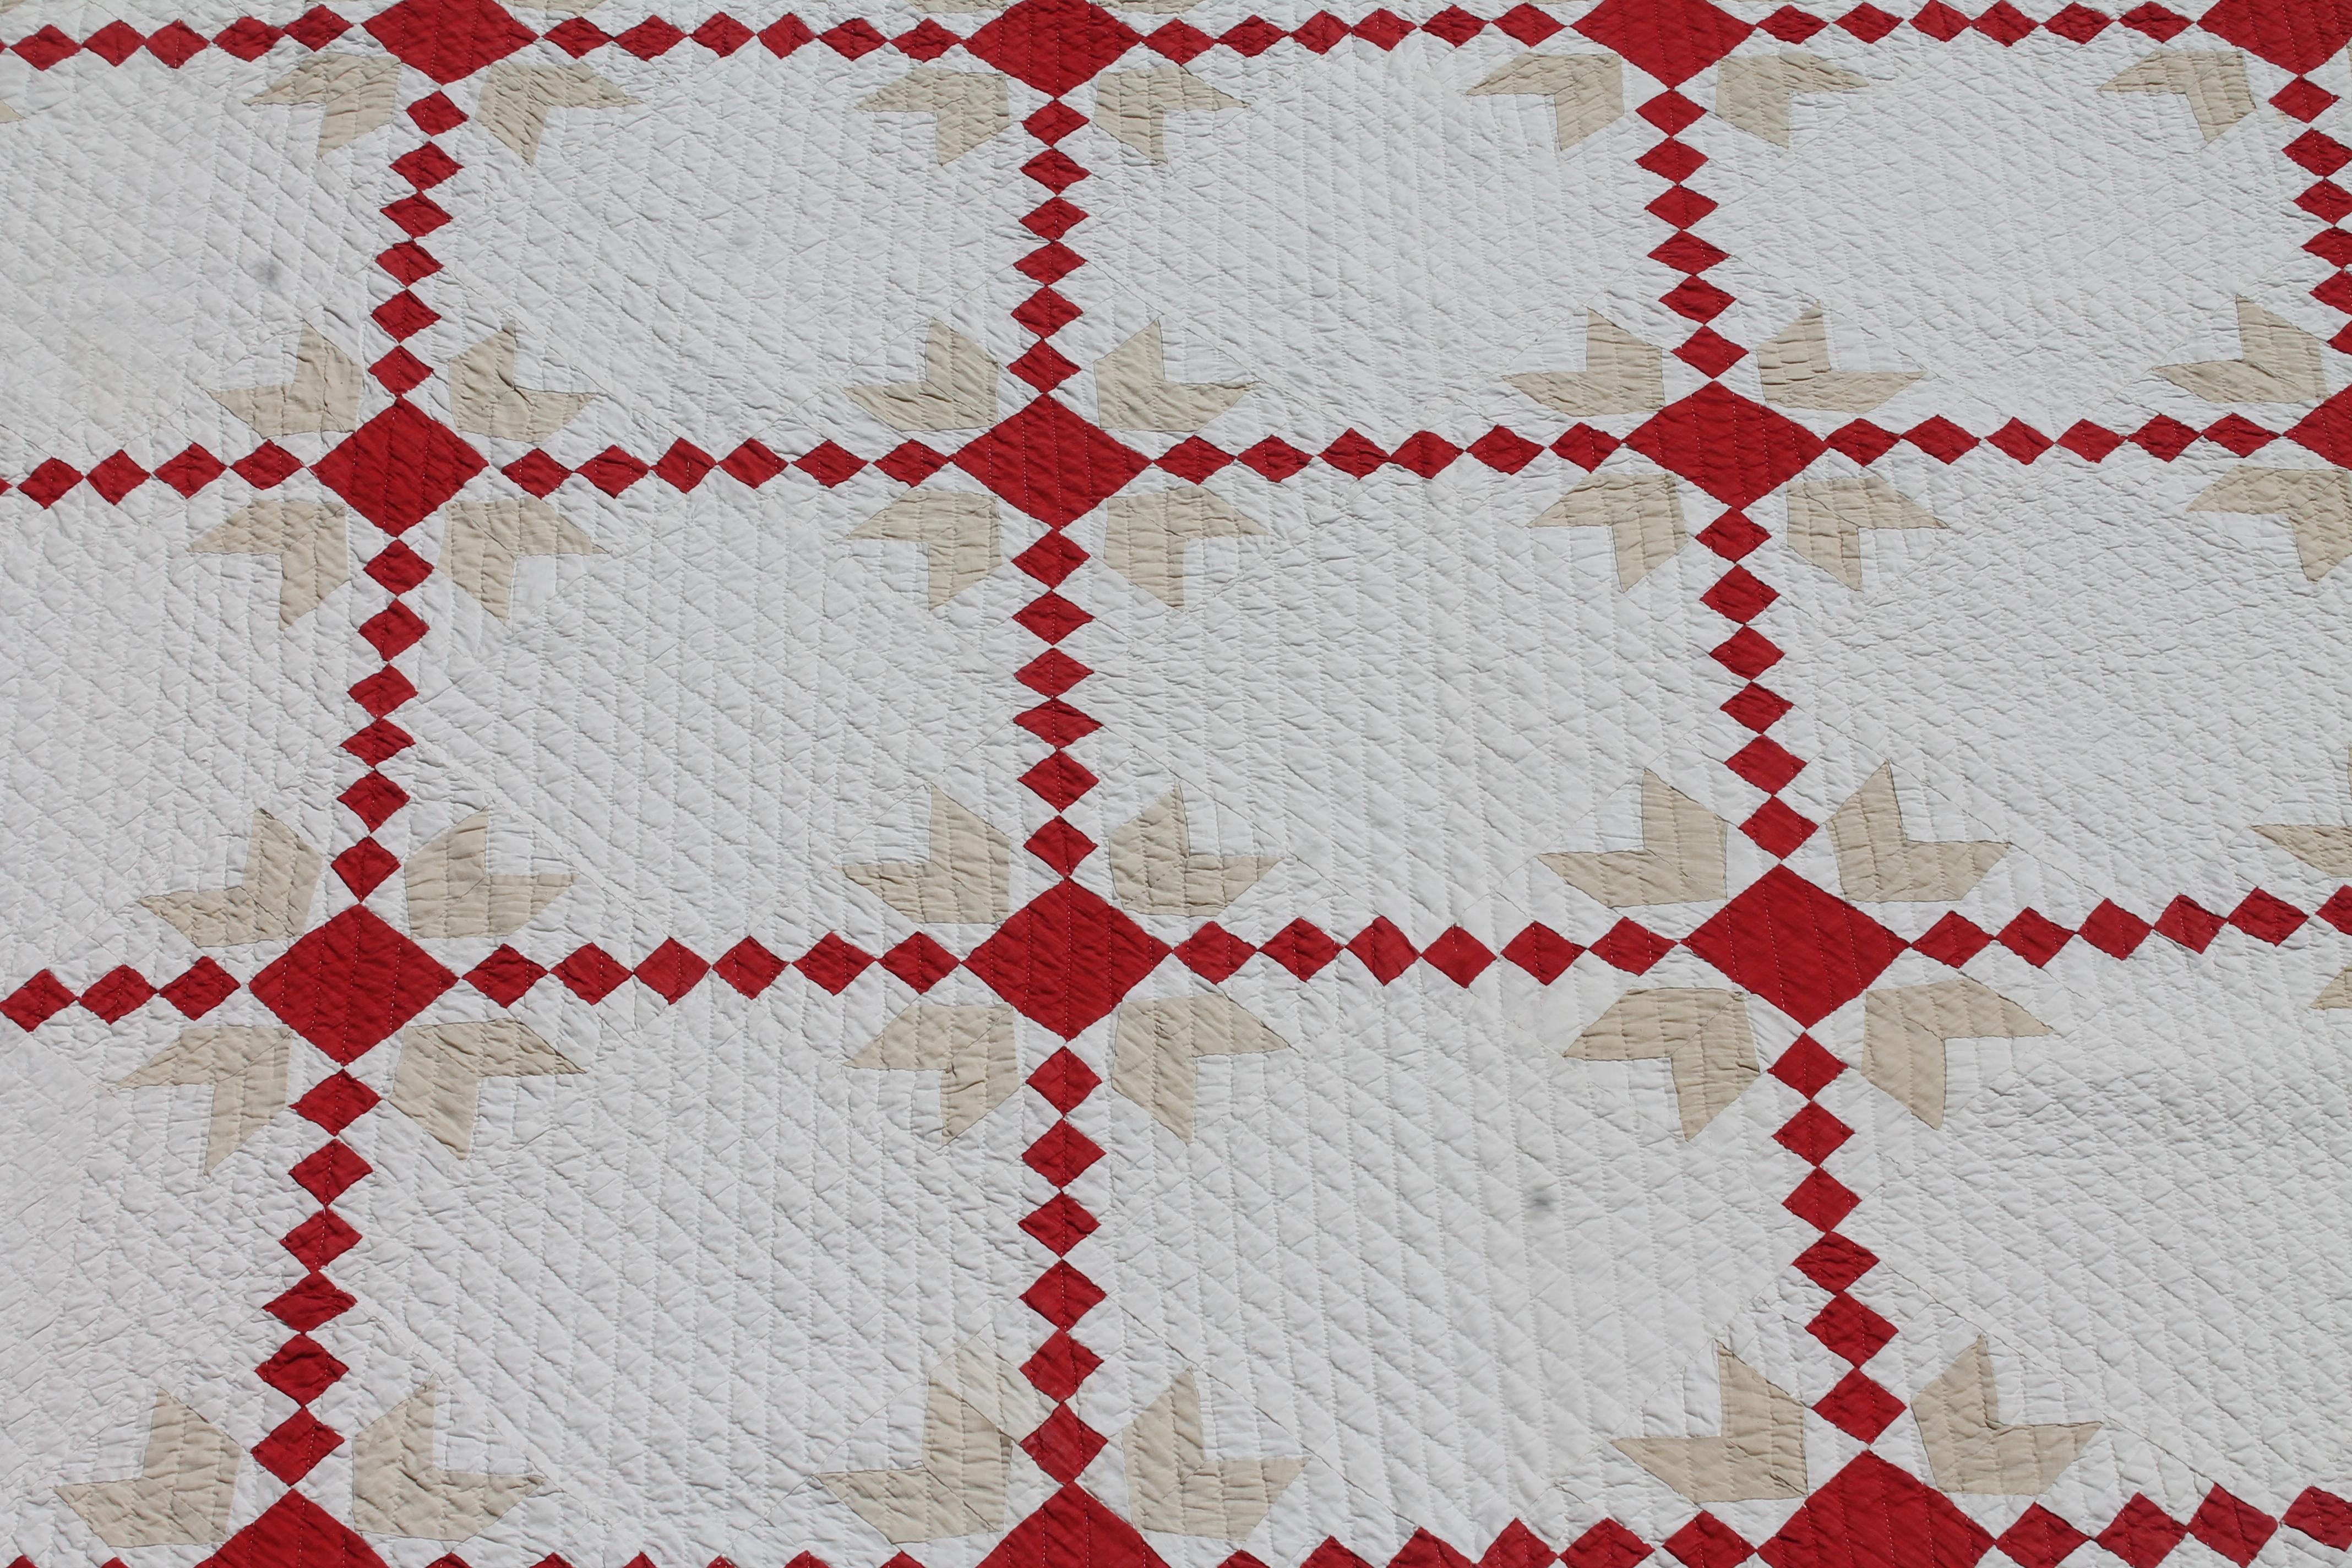 This finely quilted and pieced postage stamp chain quilt is in fine condition. It is crisp condition with a slight light fade overall. It has a original brass clip from the collectors that owned it. Condition is very good.